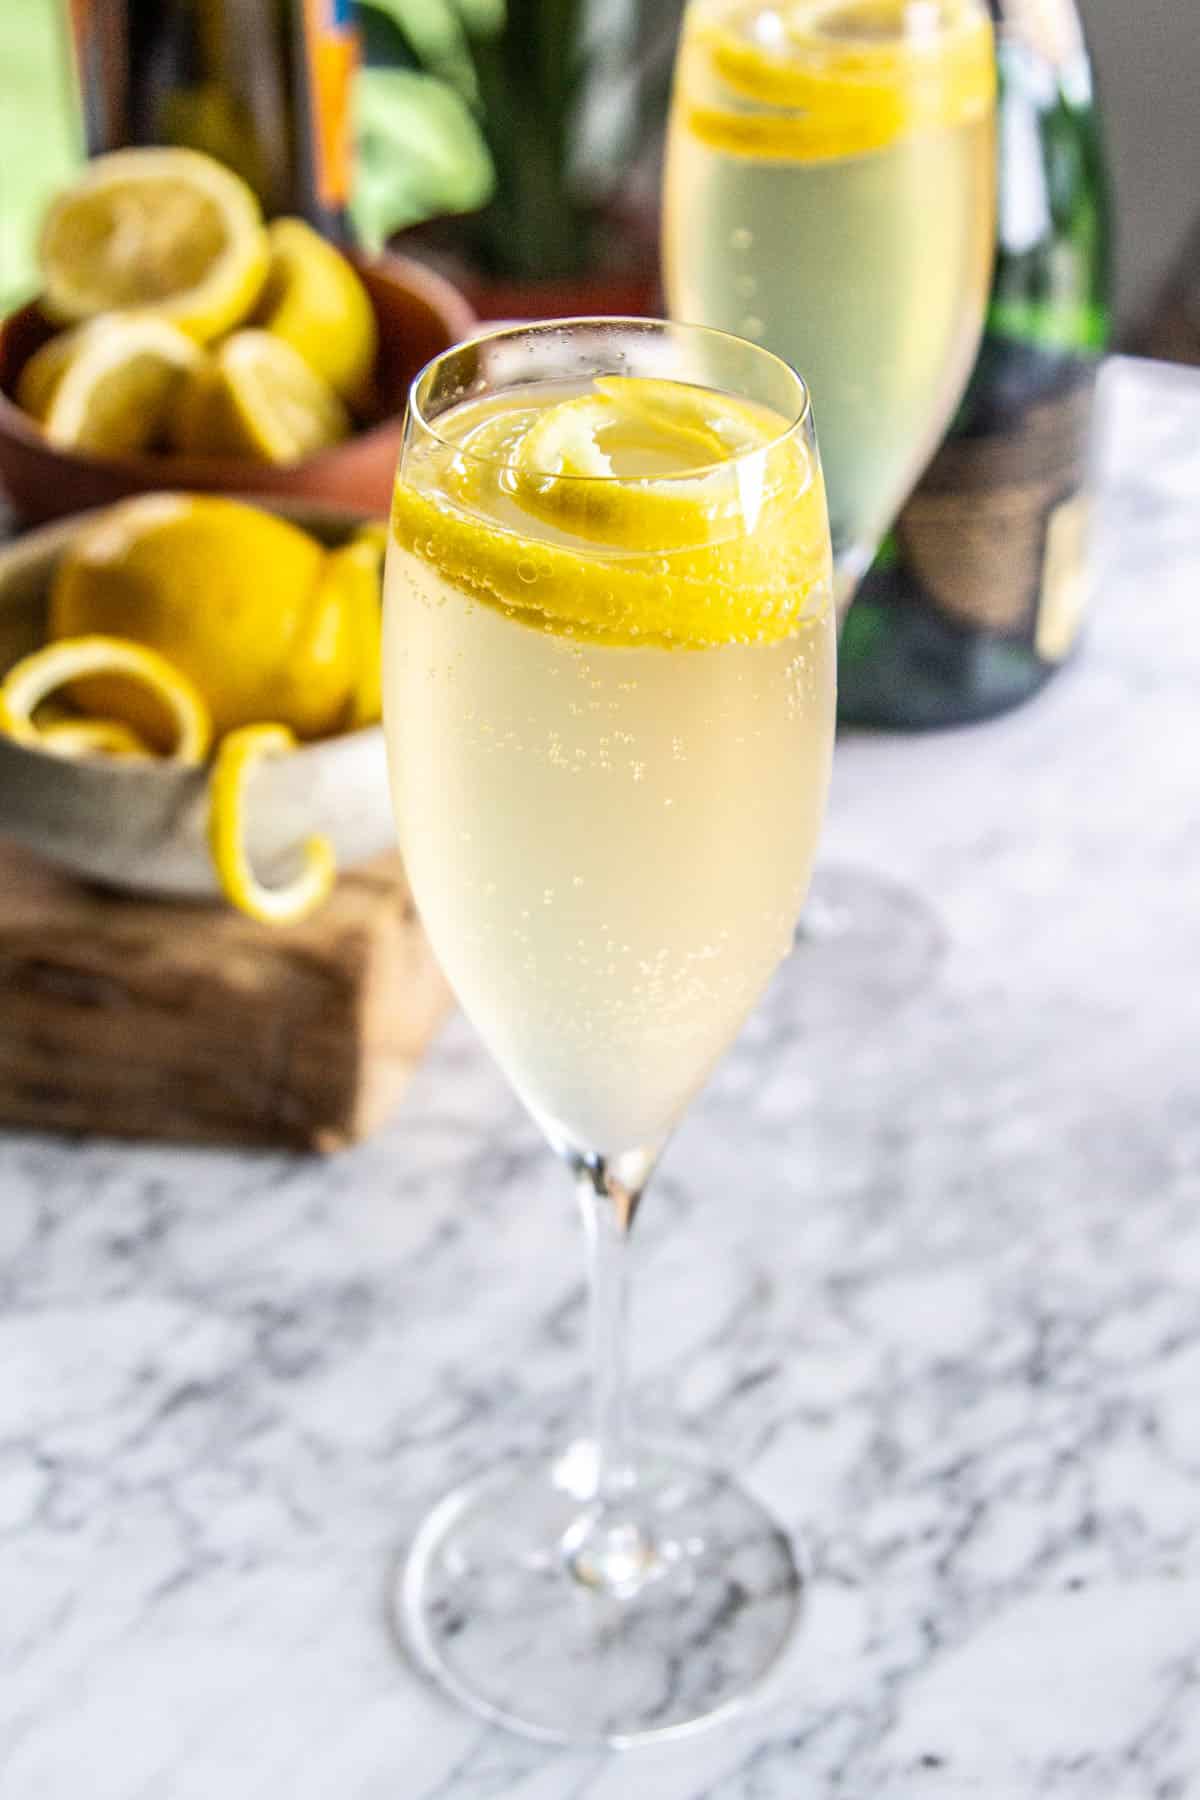 A Simple Lemon Cocktail To Celebrate The Golden State